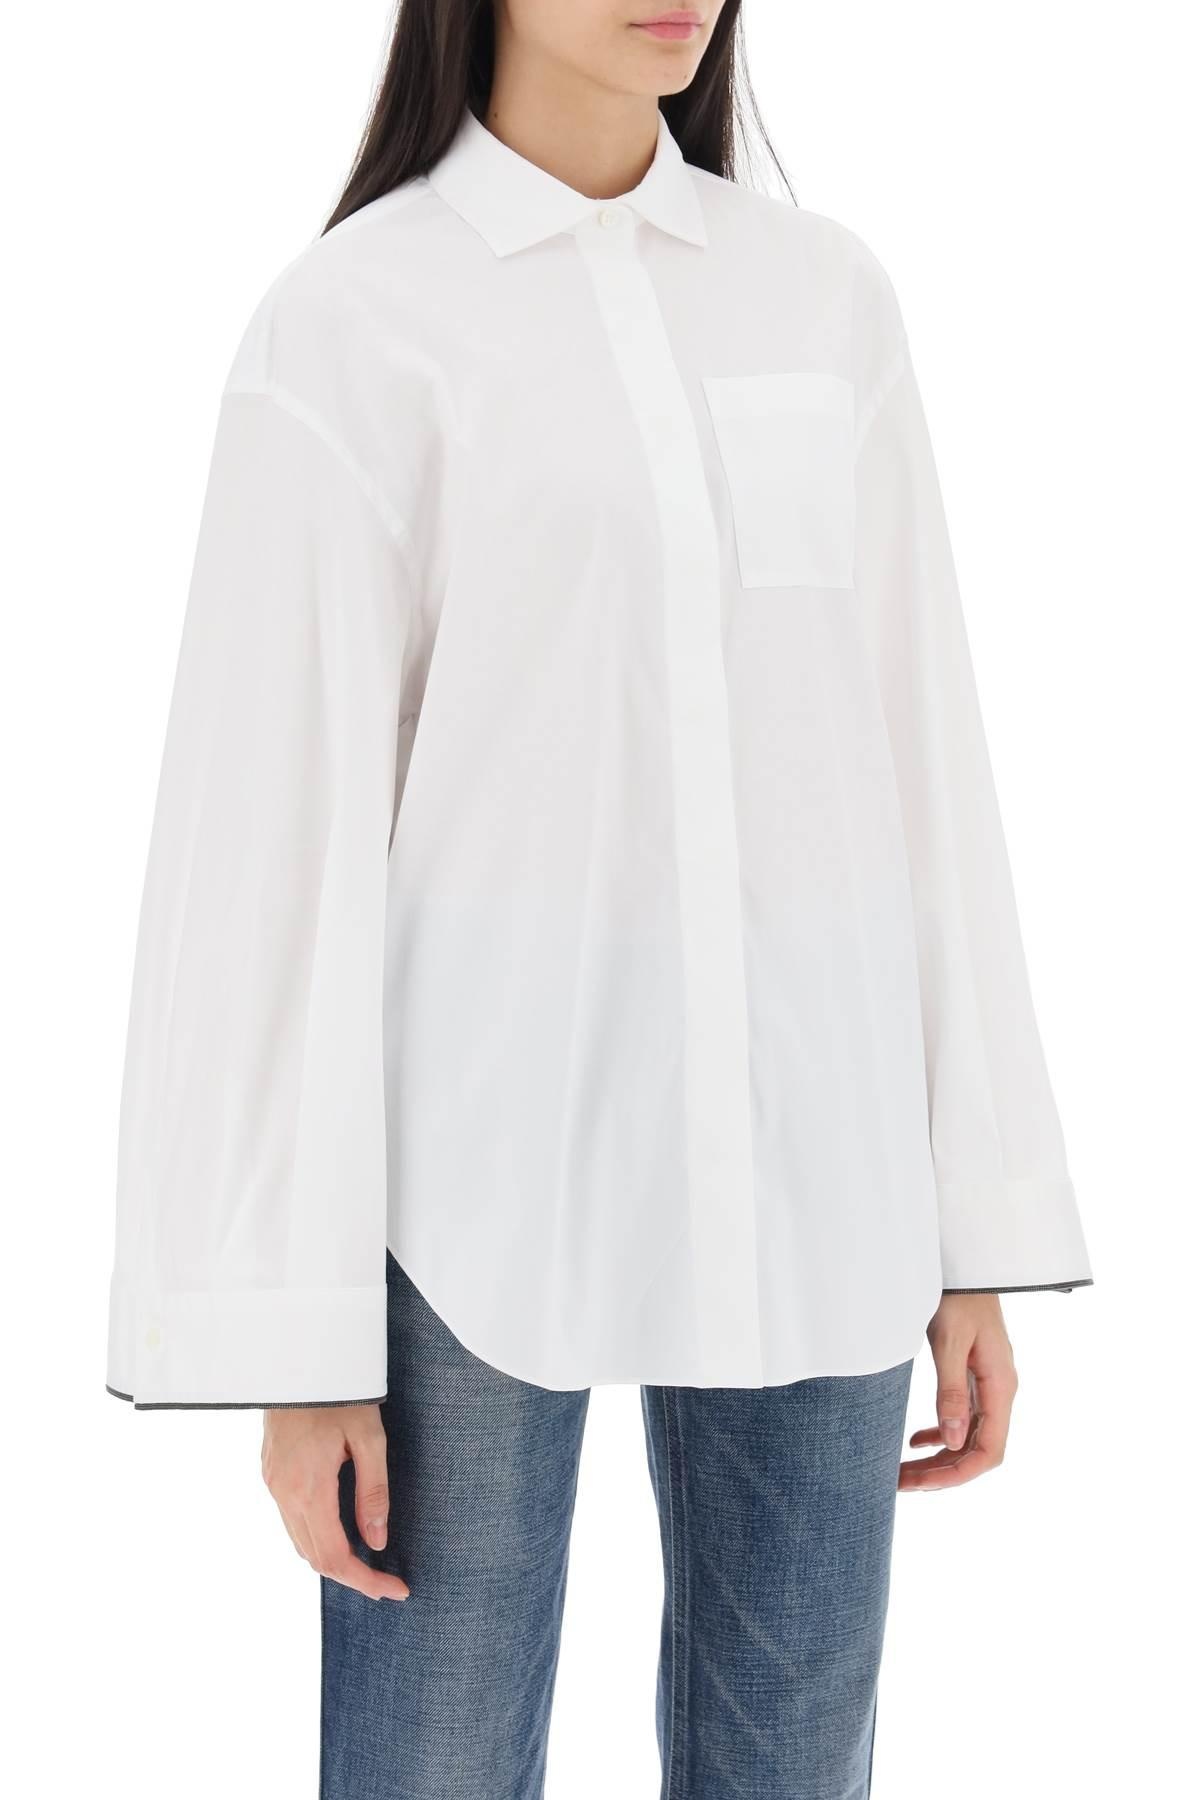 WIDE SLEEVE SHIRT WITH SHINY CUFF DETAILS - 3